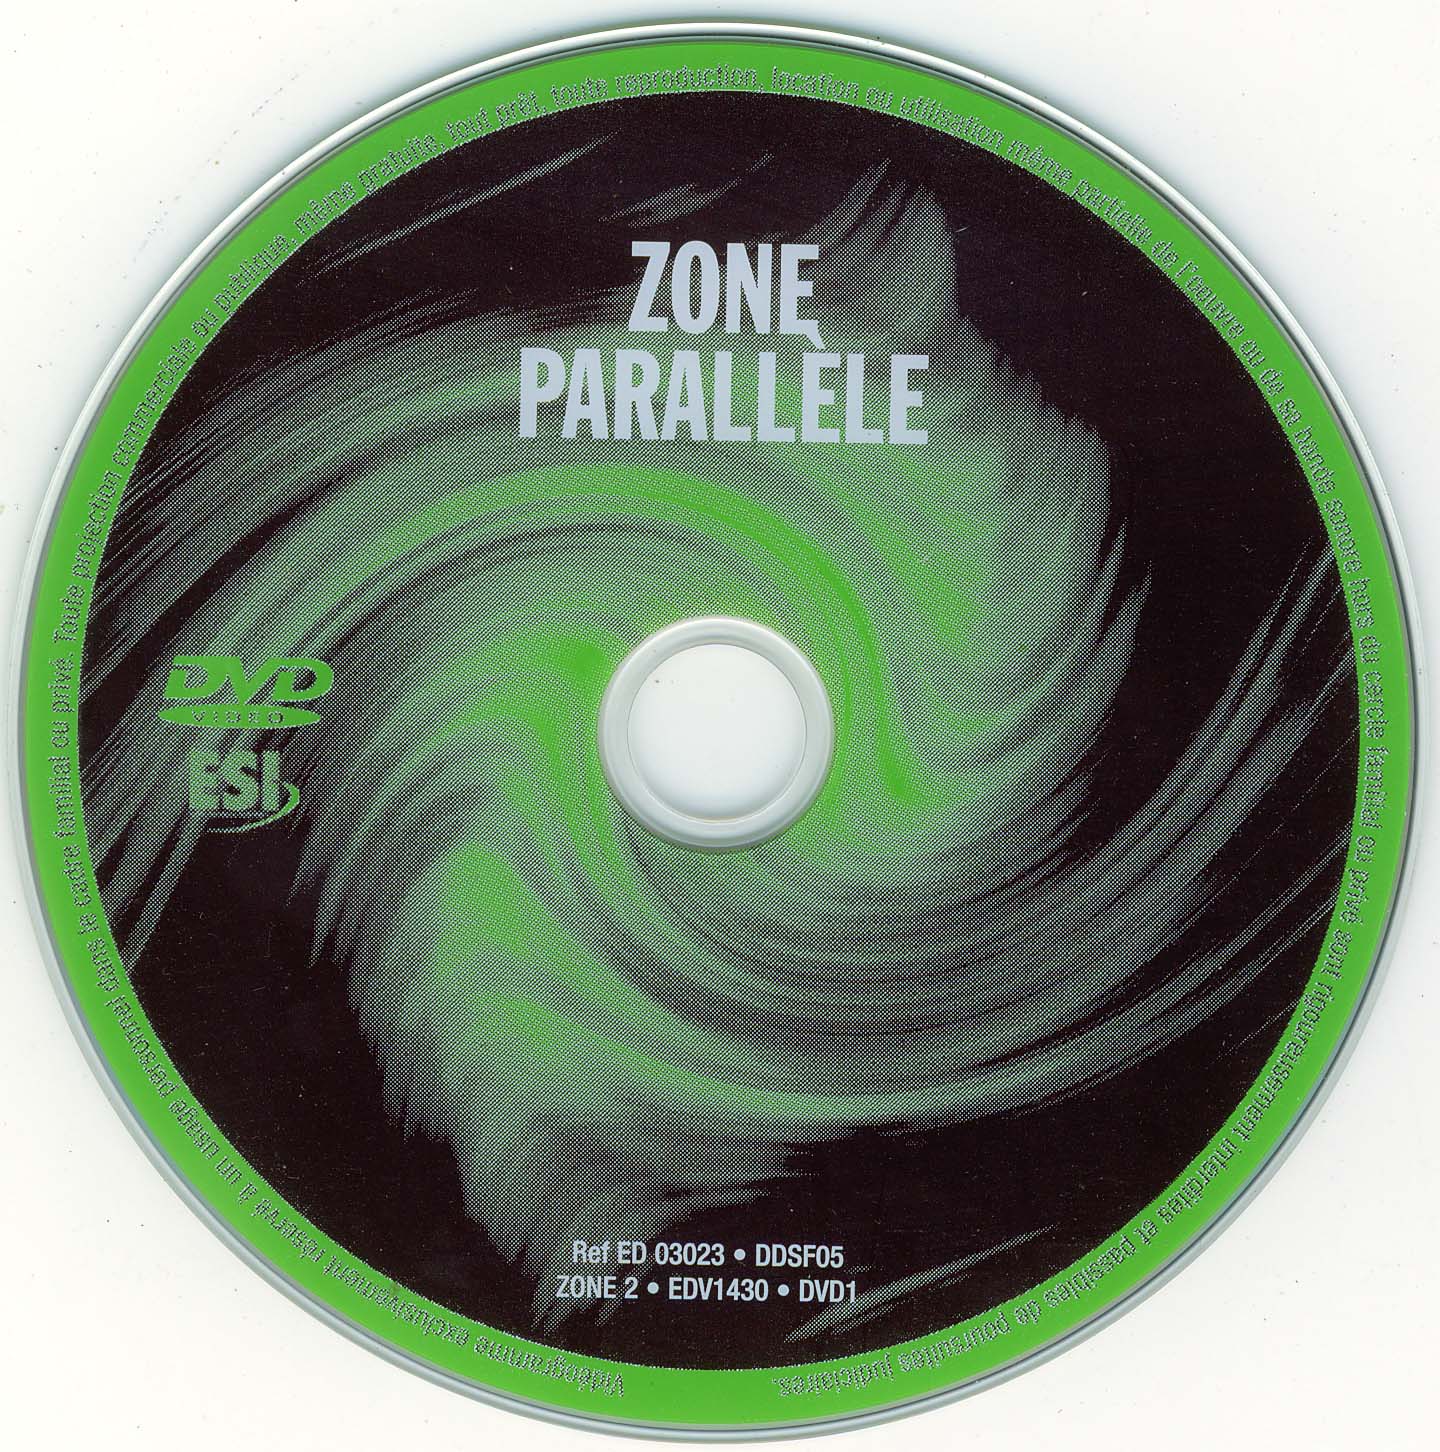 Zone parallle